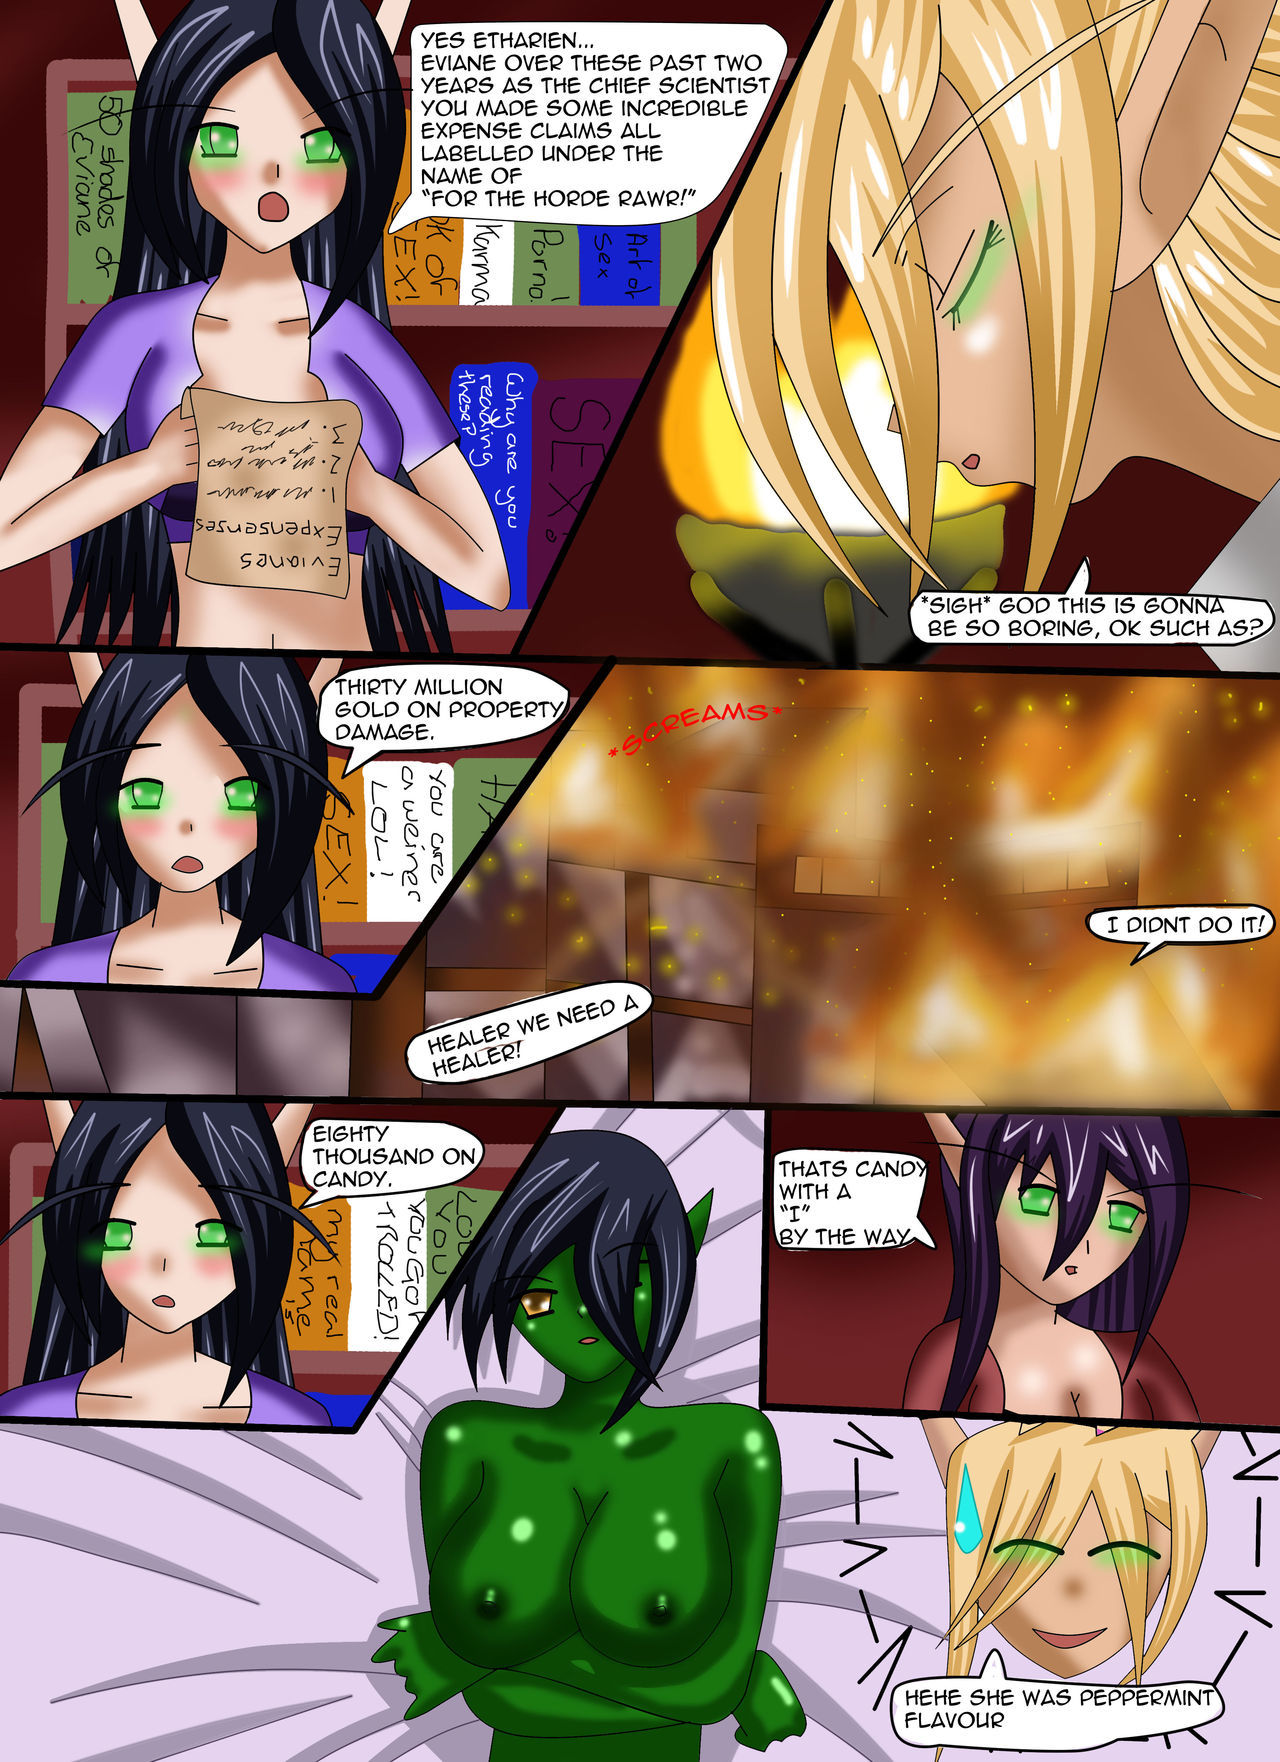 Fated Union World of Warcraft by Eviane page 8